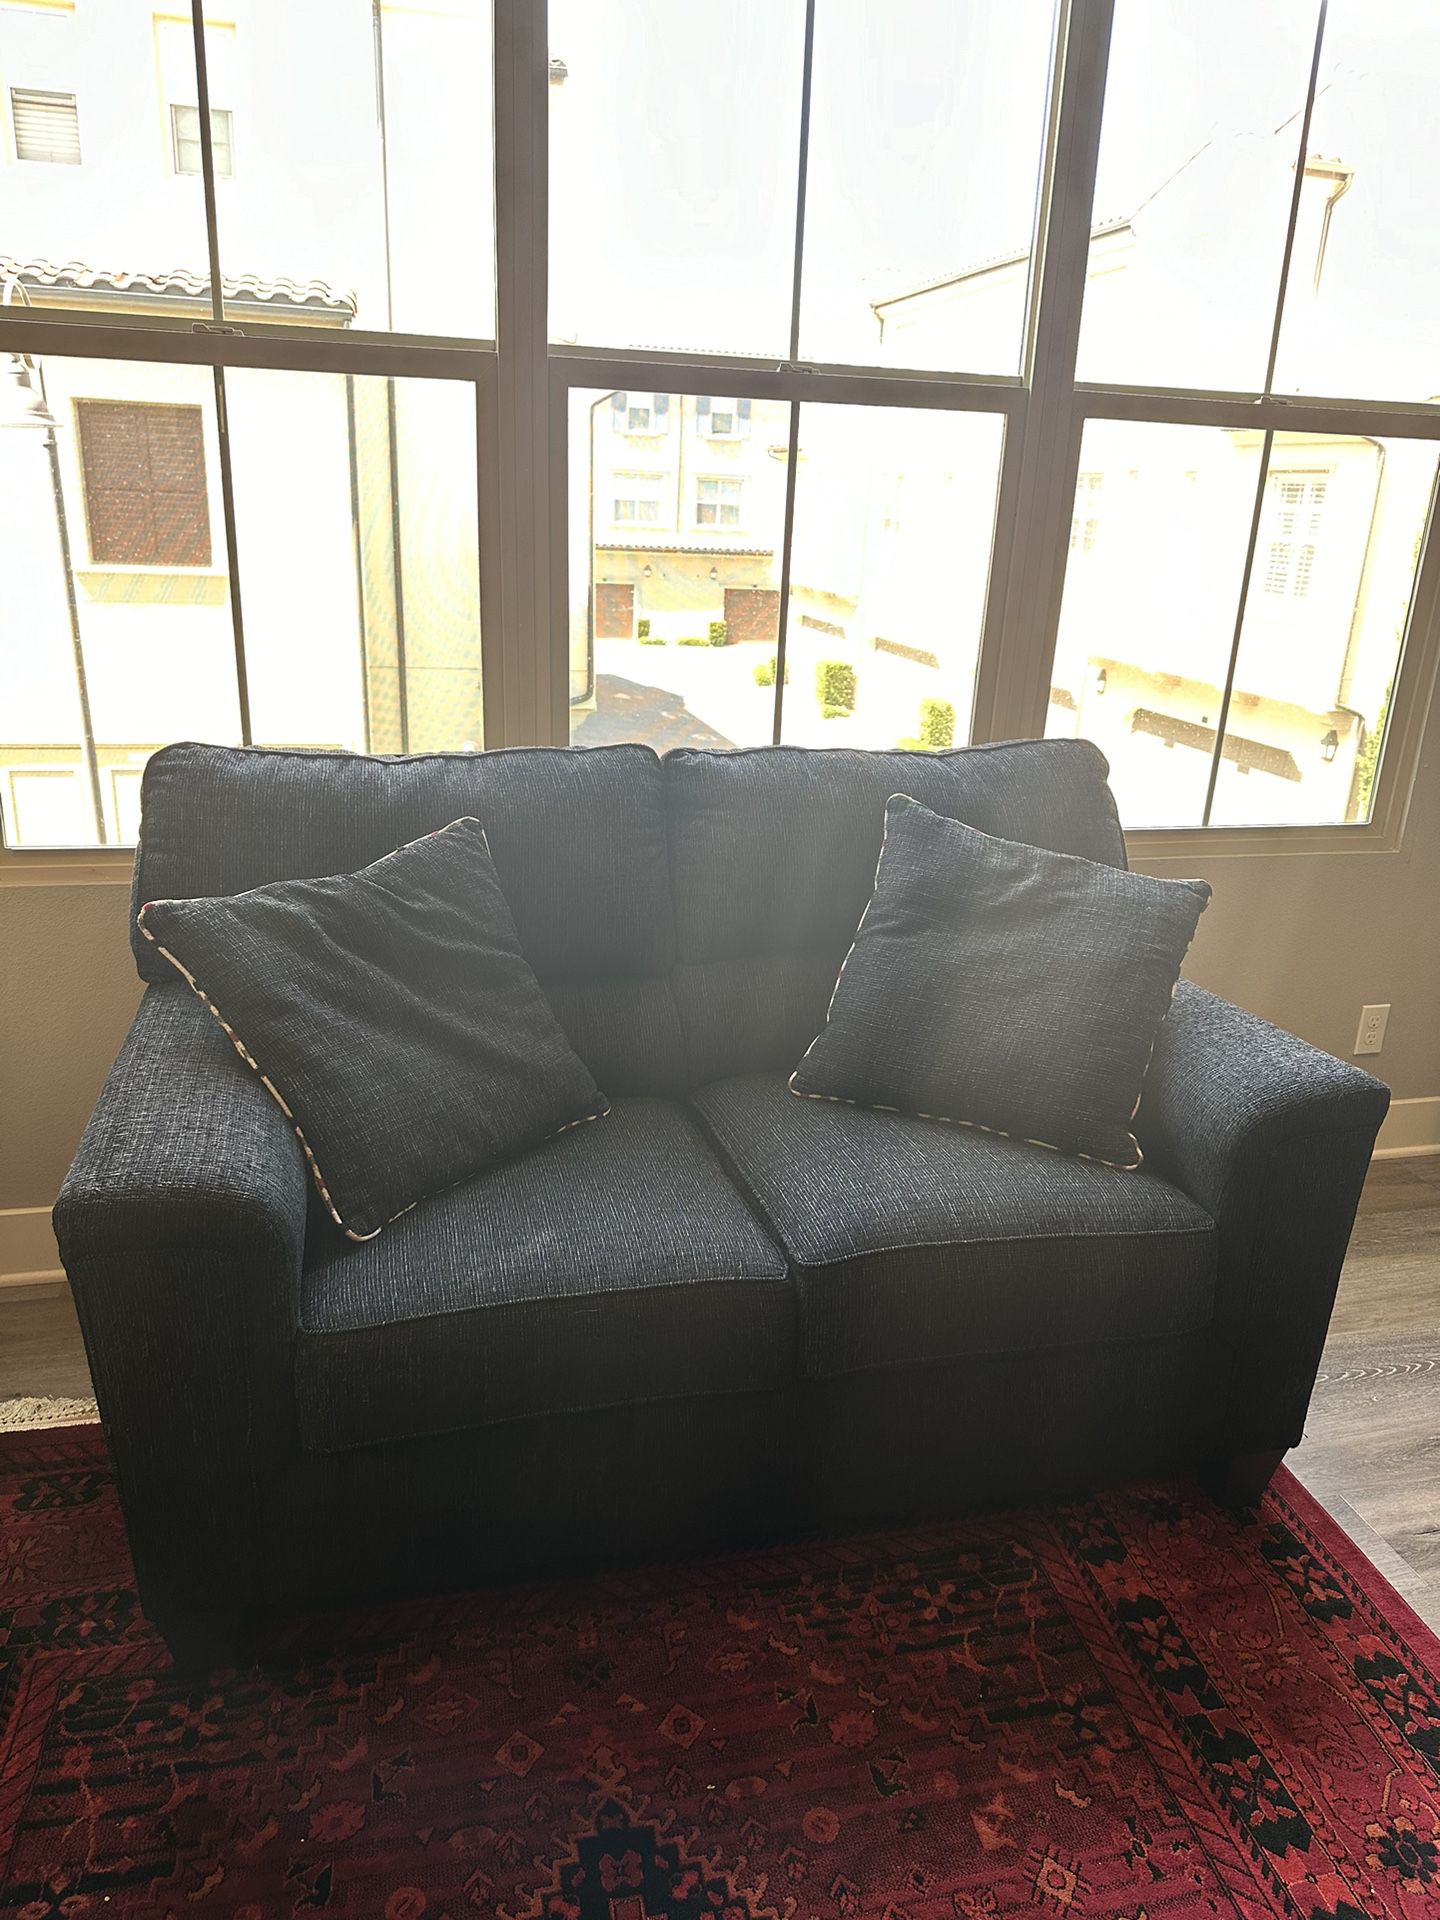 $150 Bob’s Furniture Store Black Love Couch (2 Seater) 37inW x 60in L x 39xH